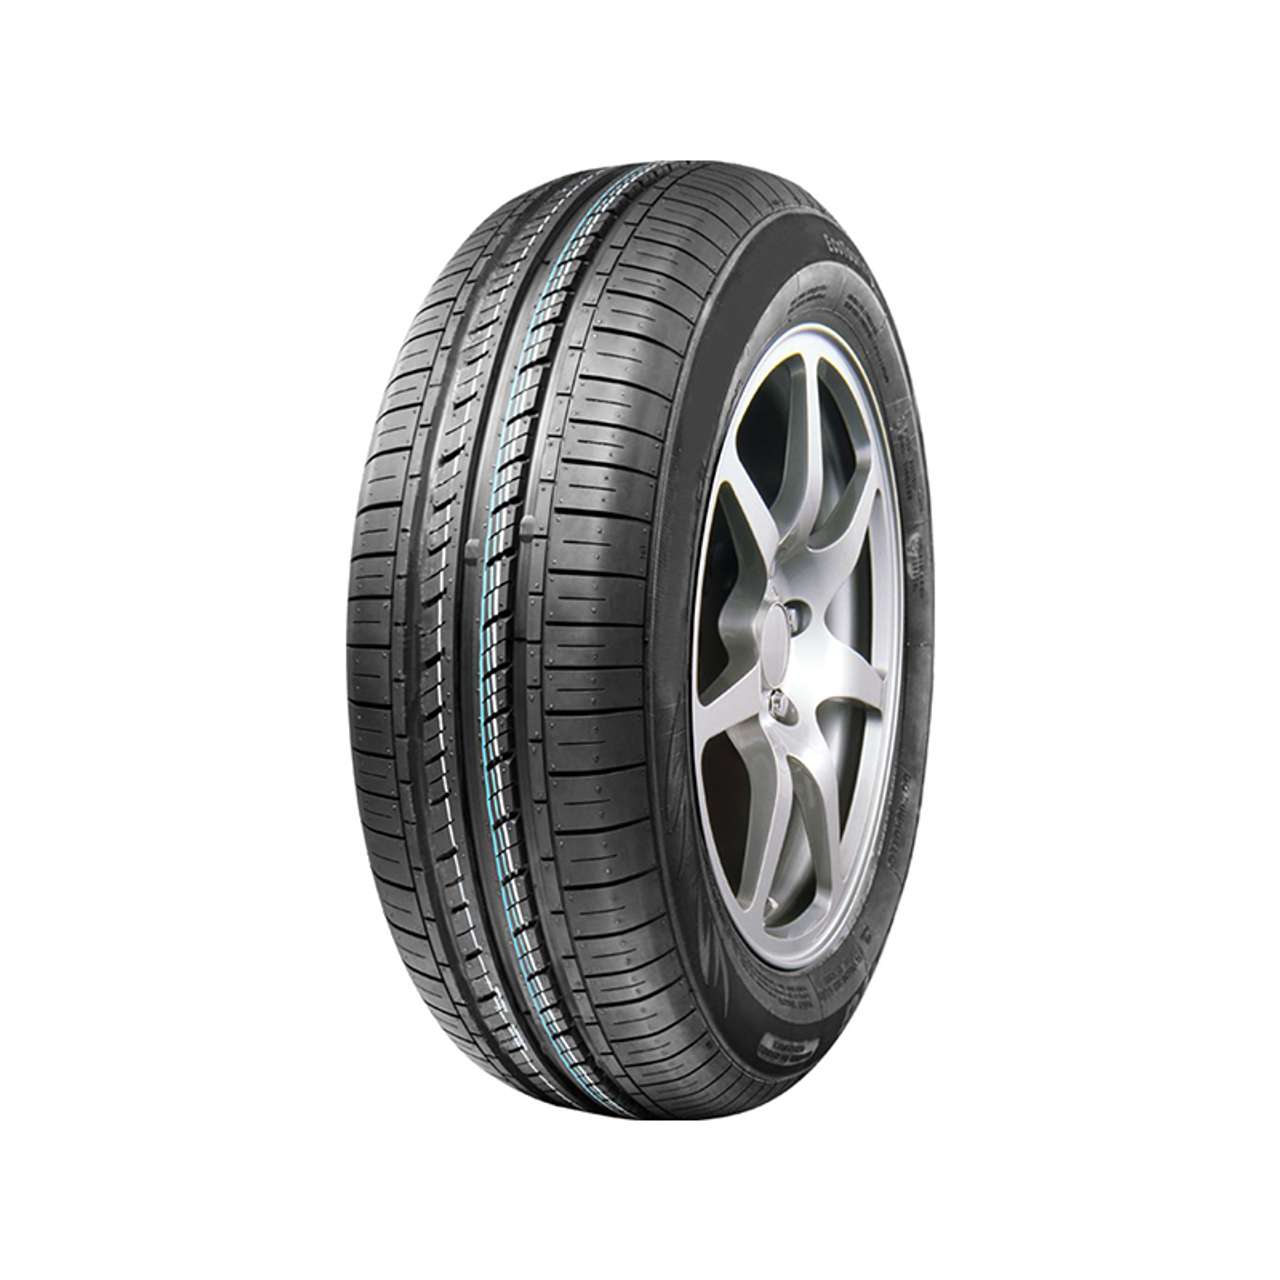 STAR PERFORMER COMET 165/65R14 79T BSW